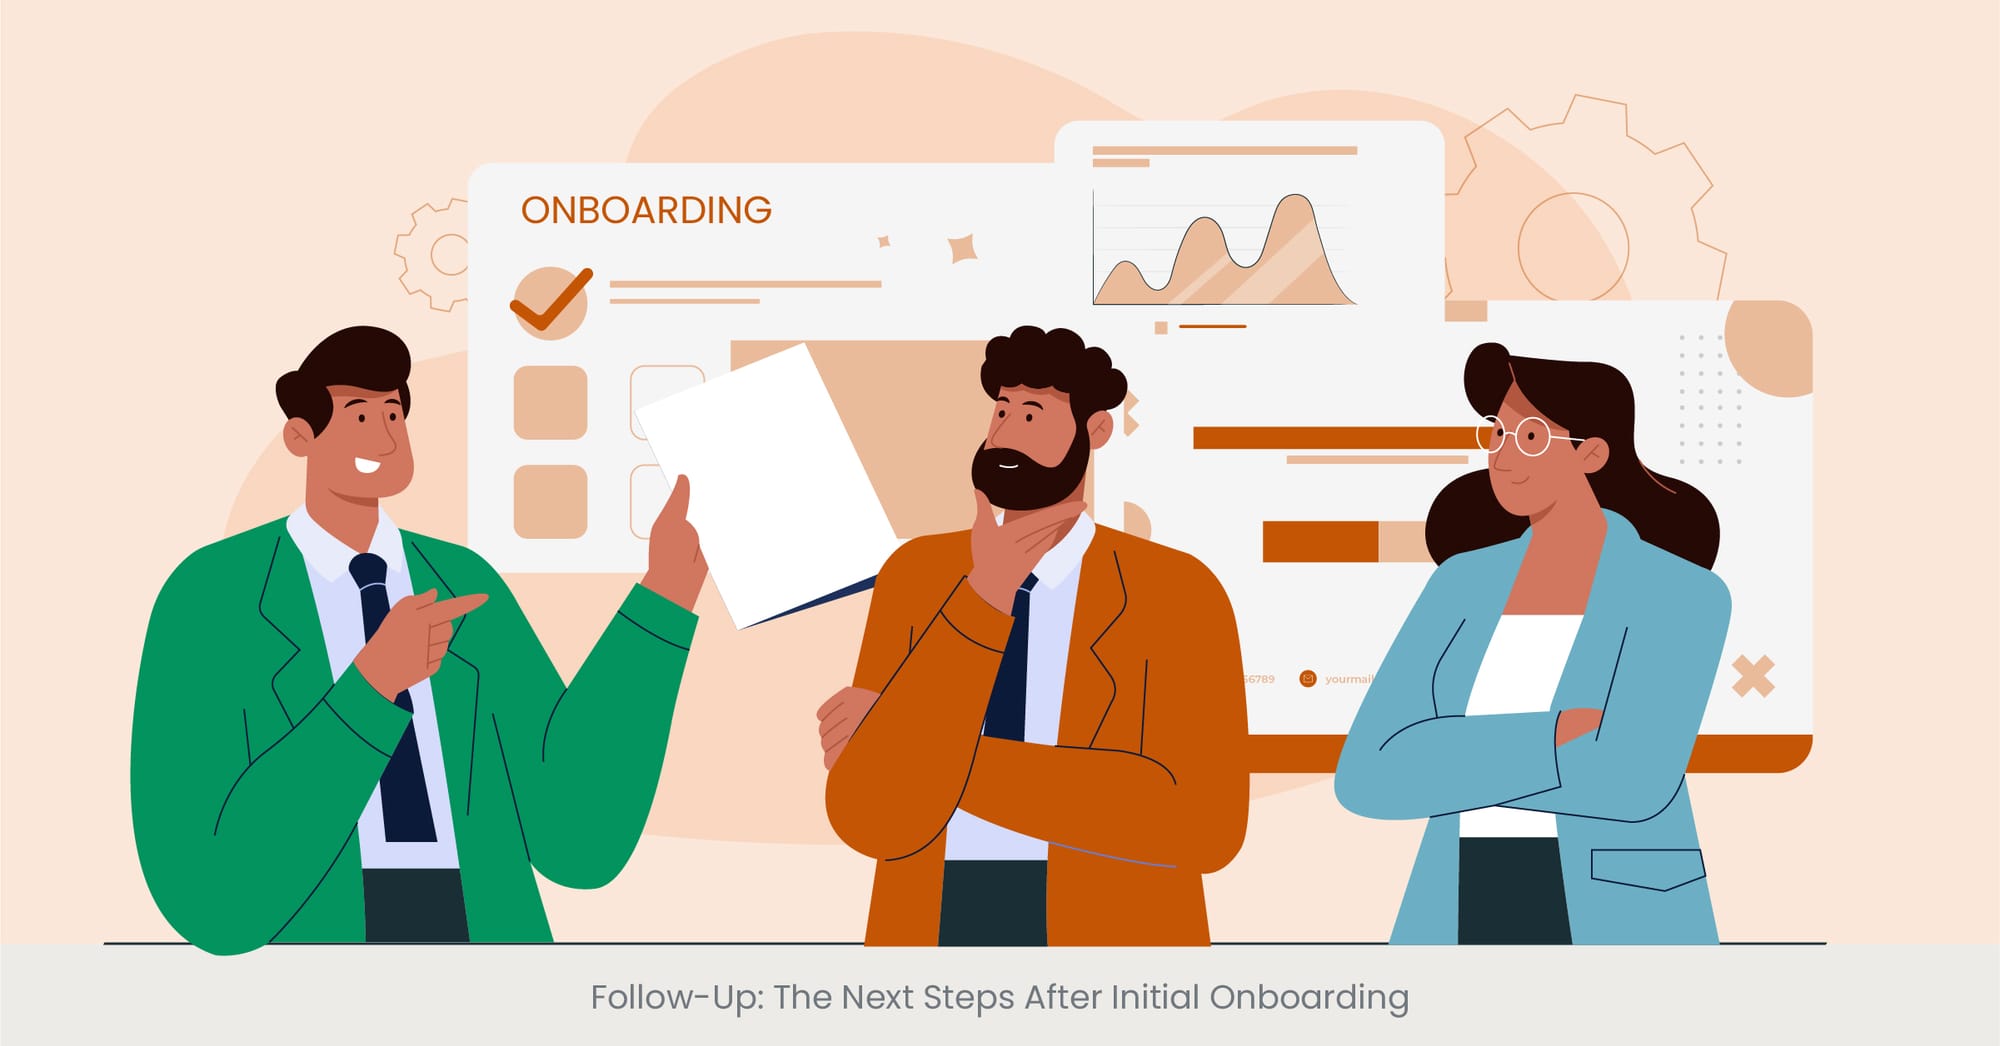 Follow-Up: The Next Steps After Initial Onboarding